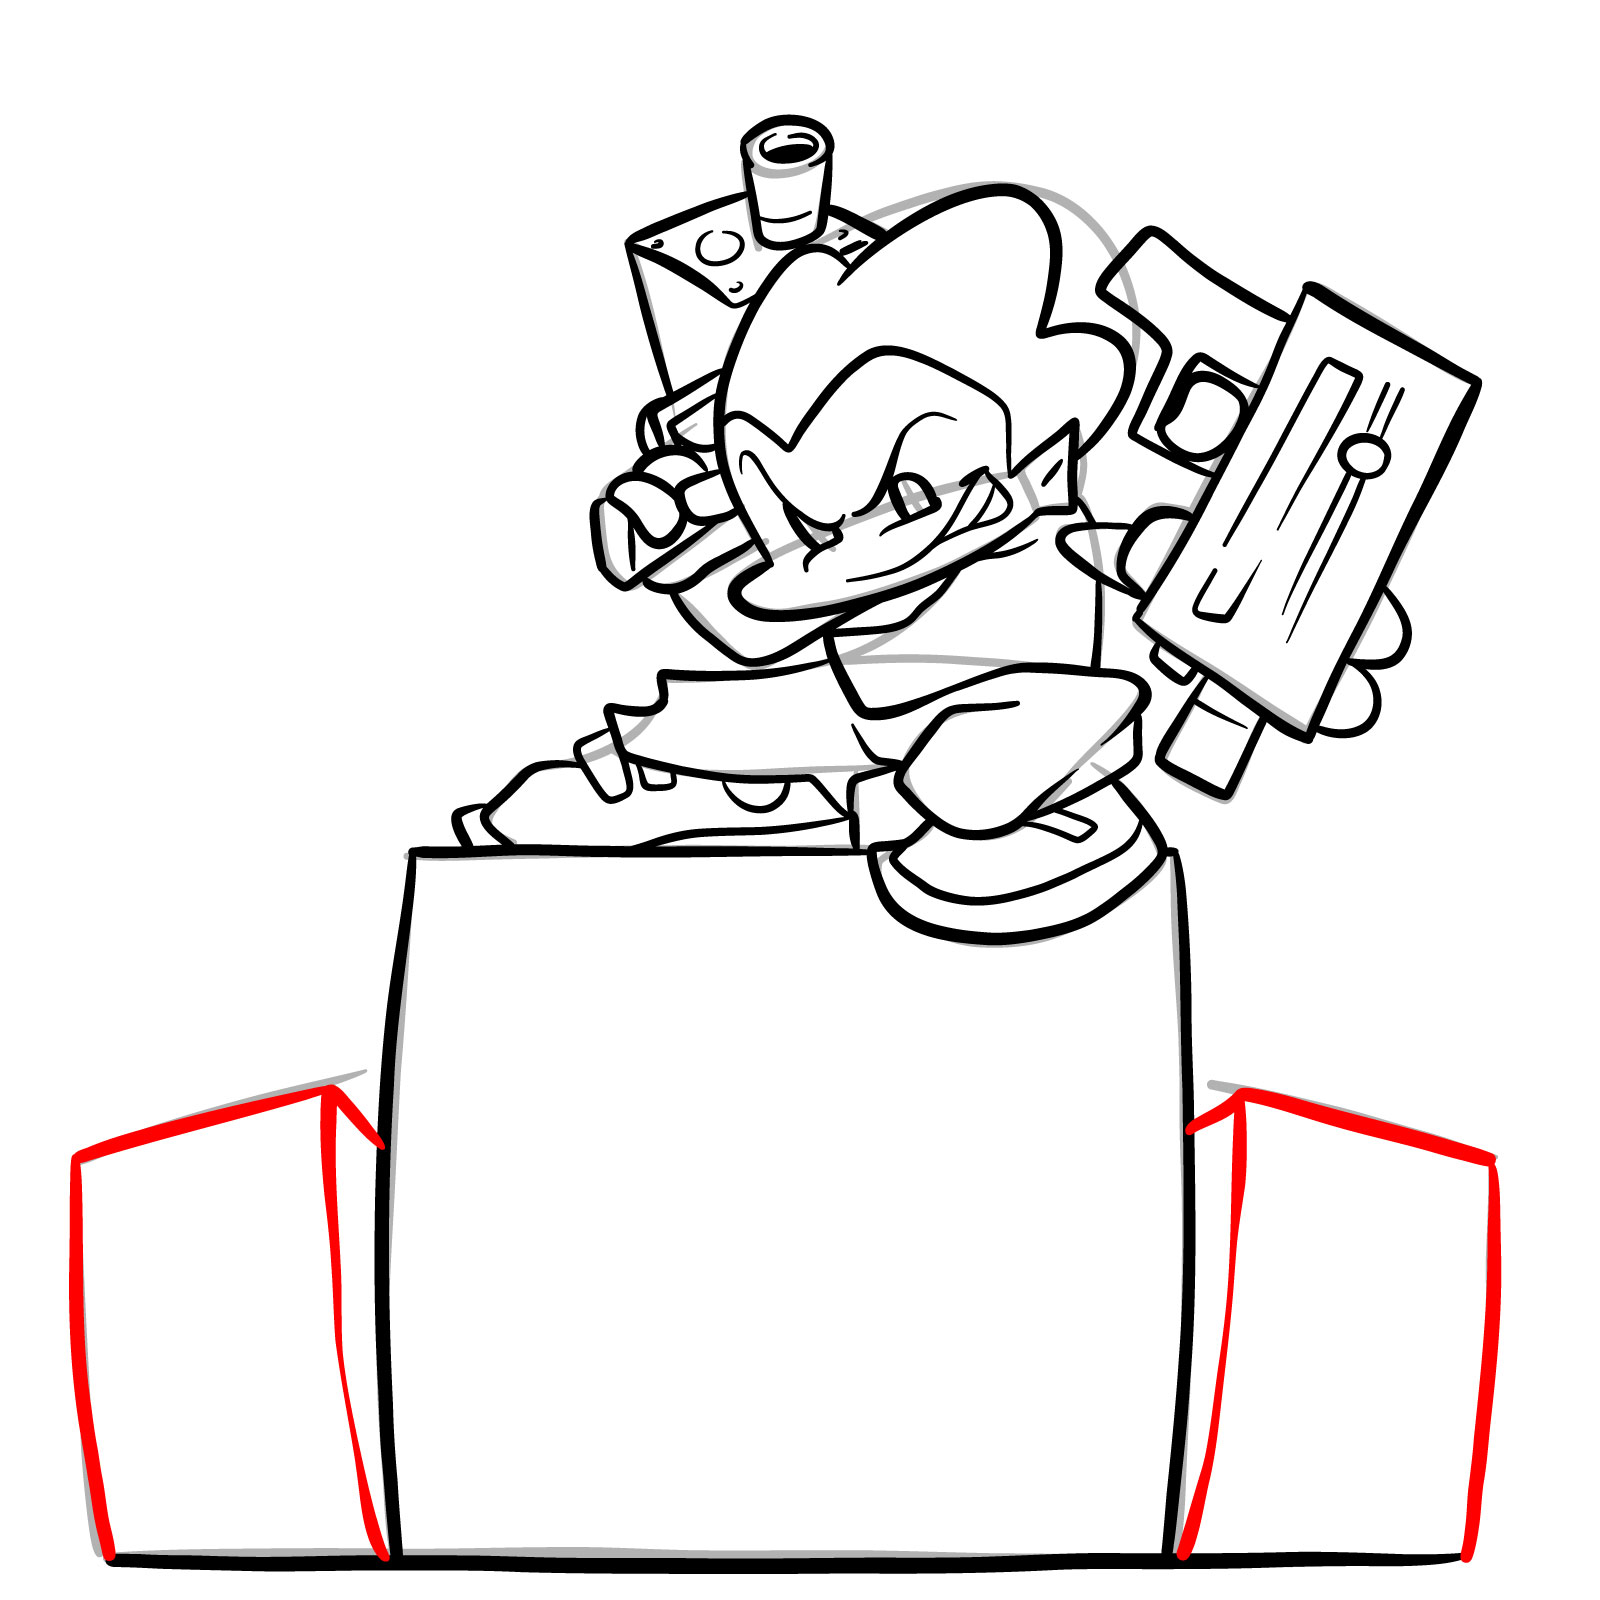 How to draw Pico on the speakers - step 27